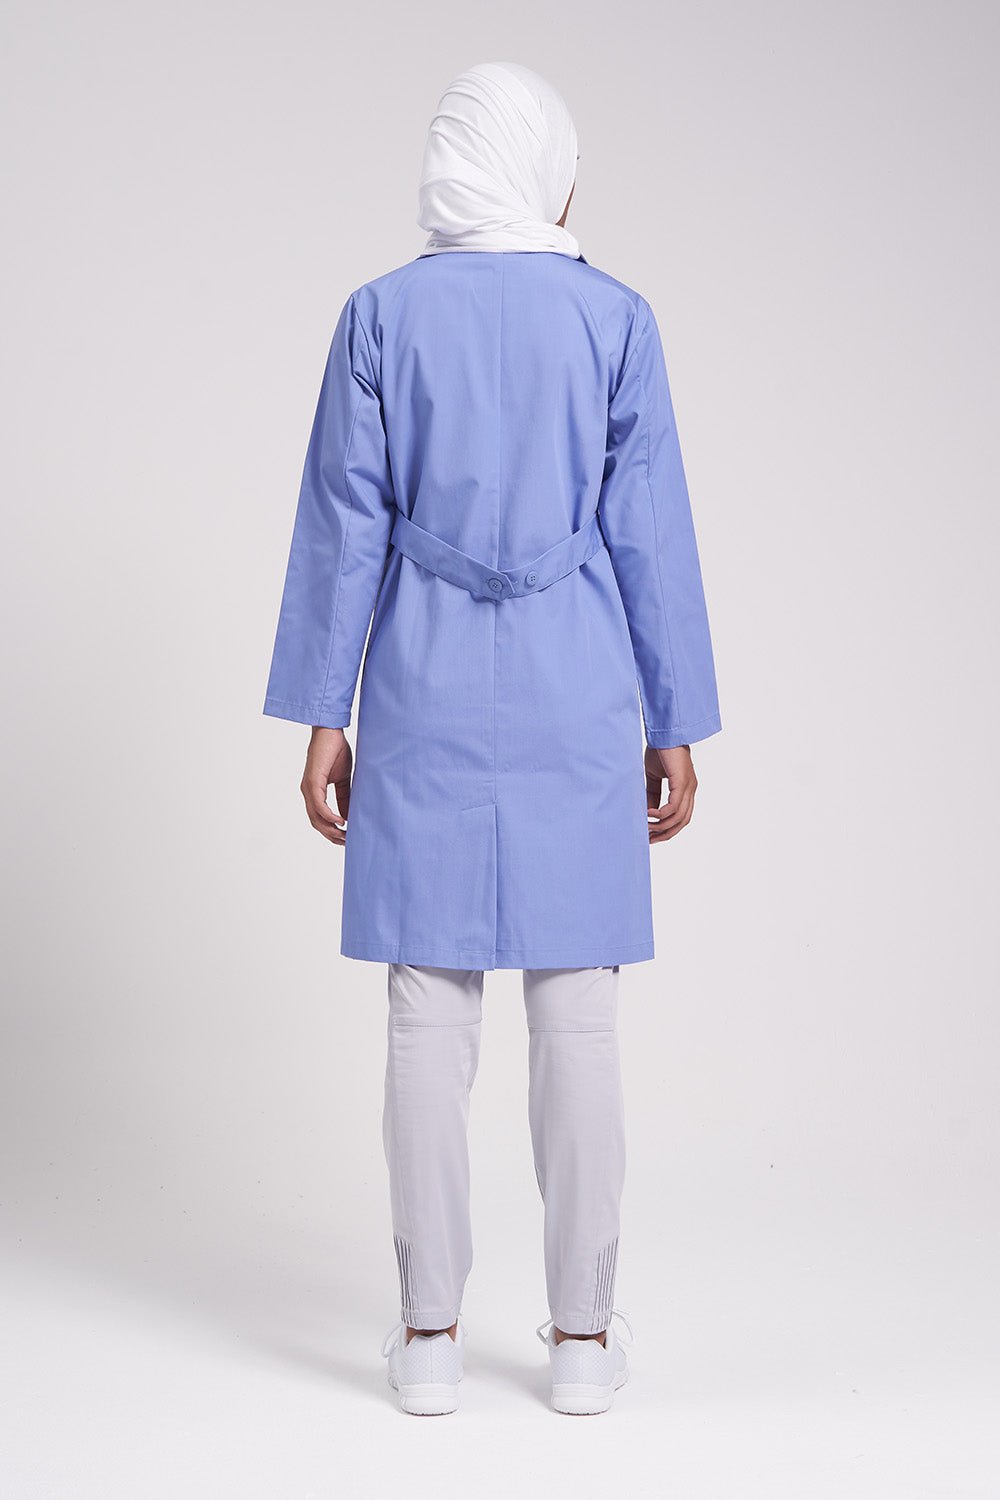 Unisex Labcoat 39" with Inner Pockets 803 - Ceil Blue